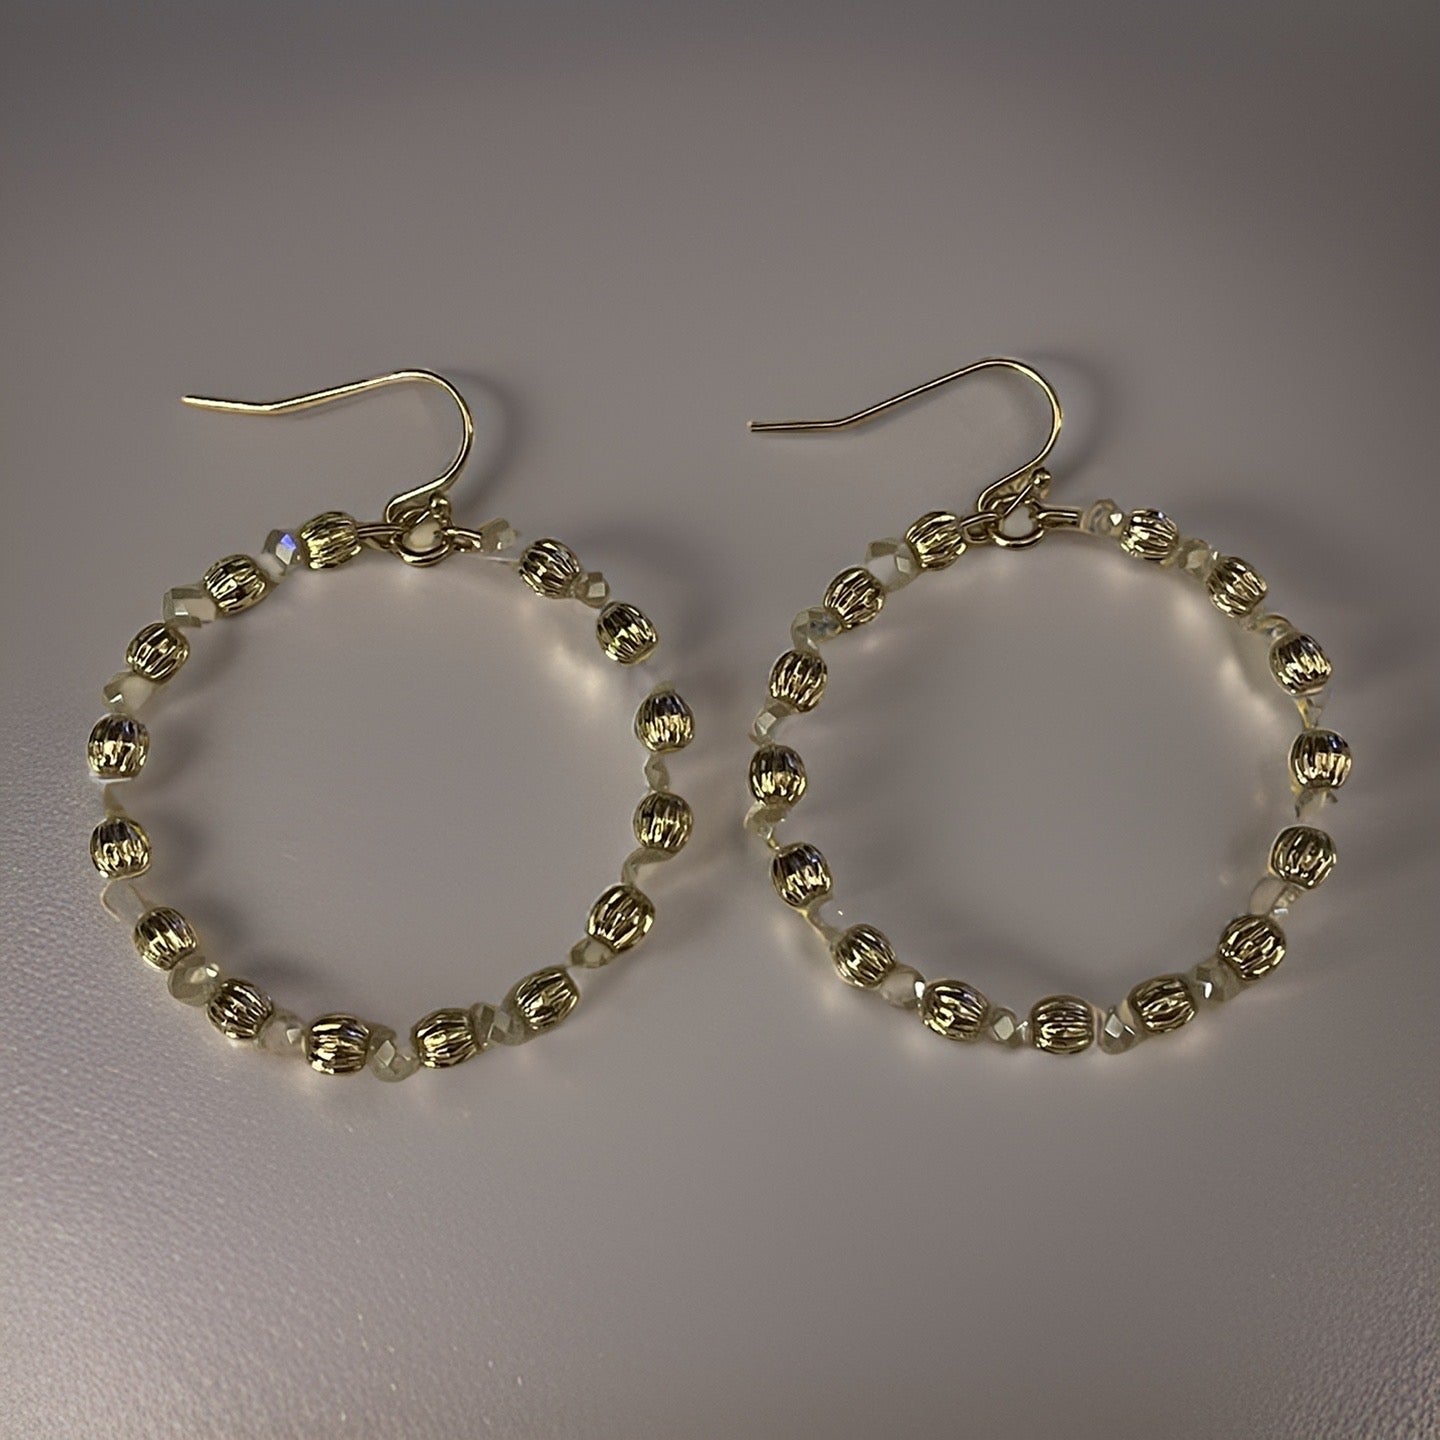 Faceted & Gold Bead Hoop Earrings - Available in 3 colors